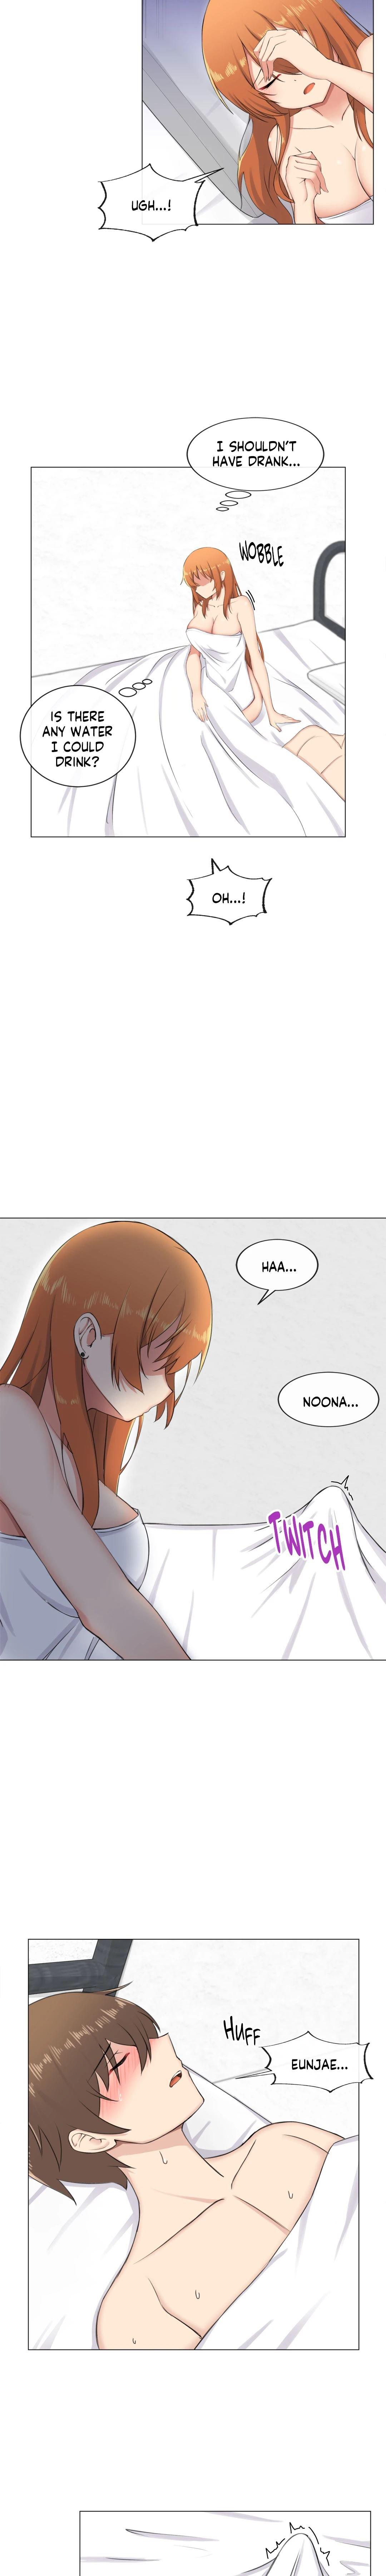 [Dumangoon, 130F] Sexcape Room: Pile Up Ch.9/9 [English] [Manhwa PDF] Completed 134